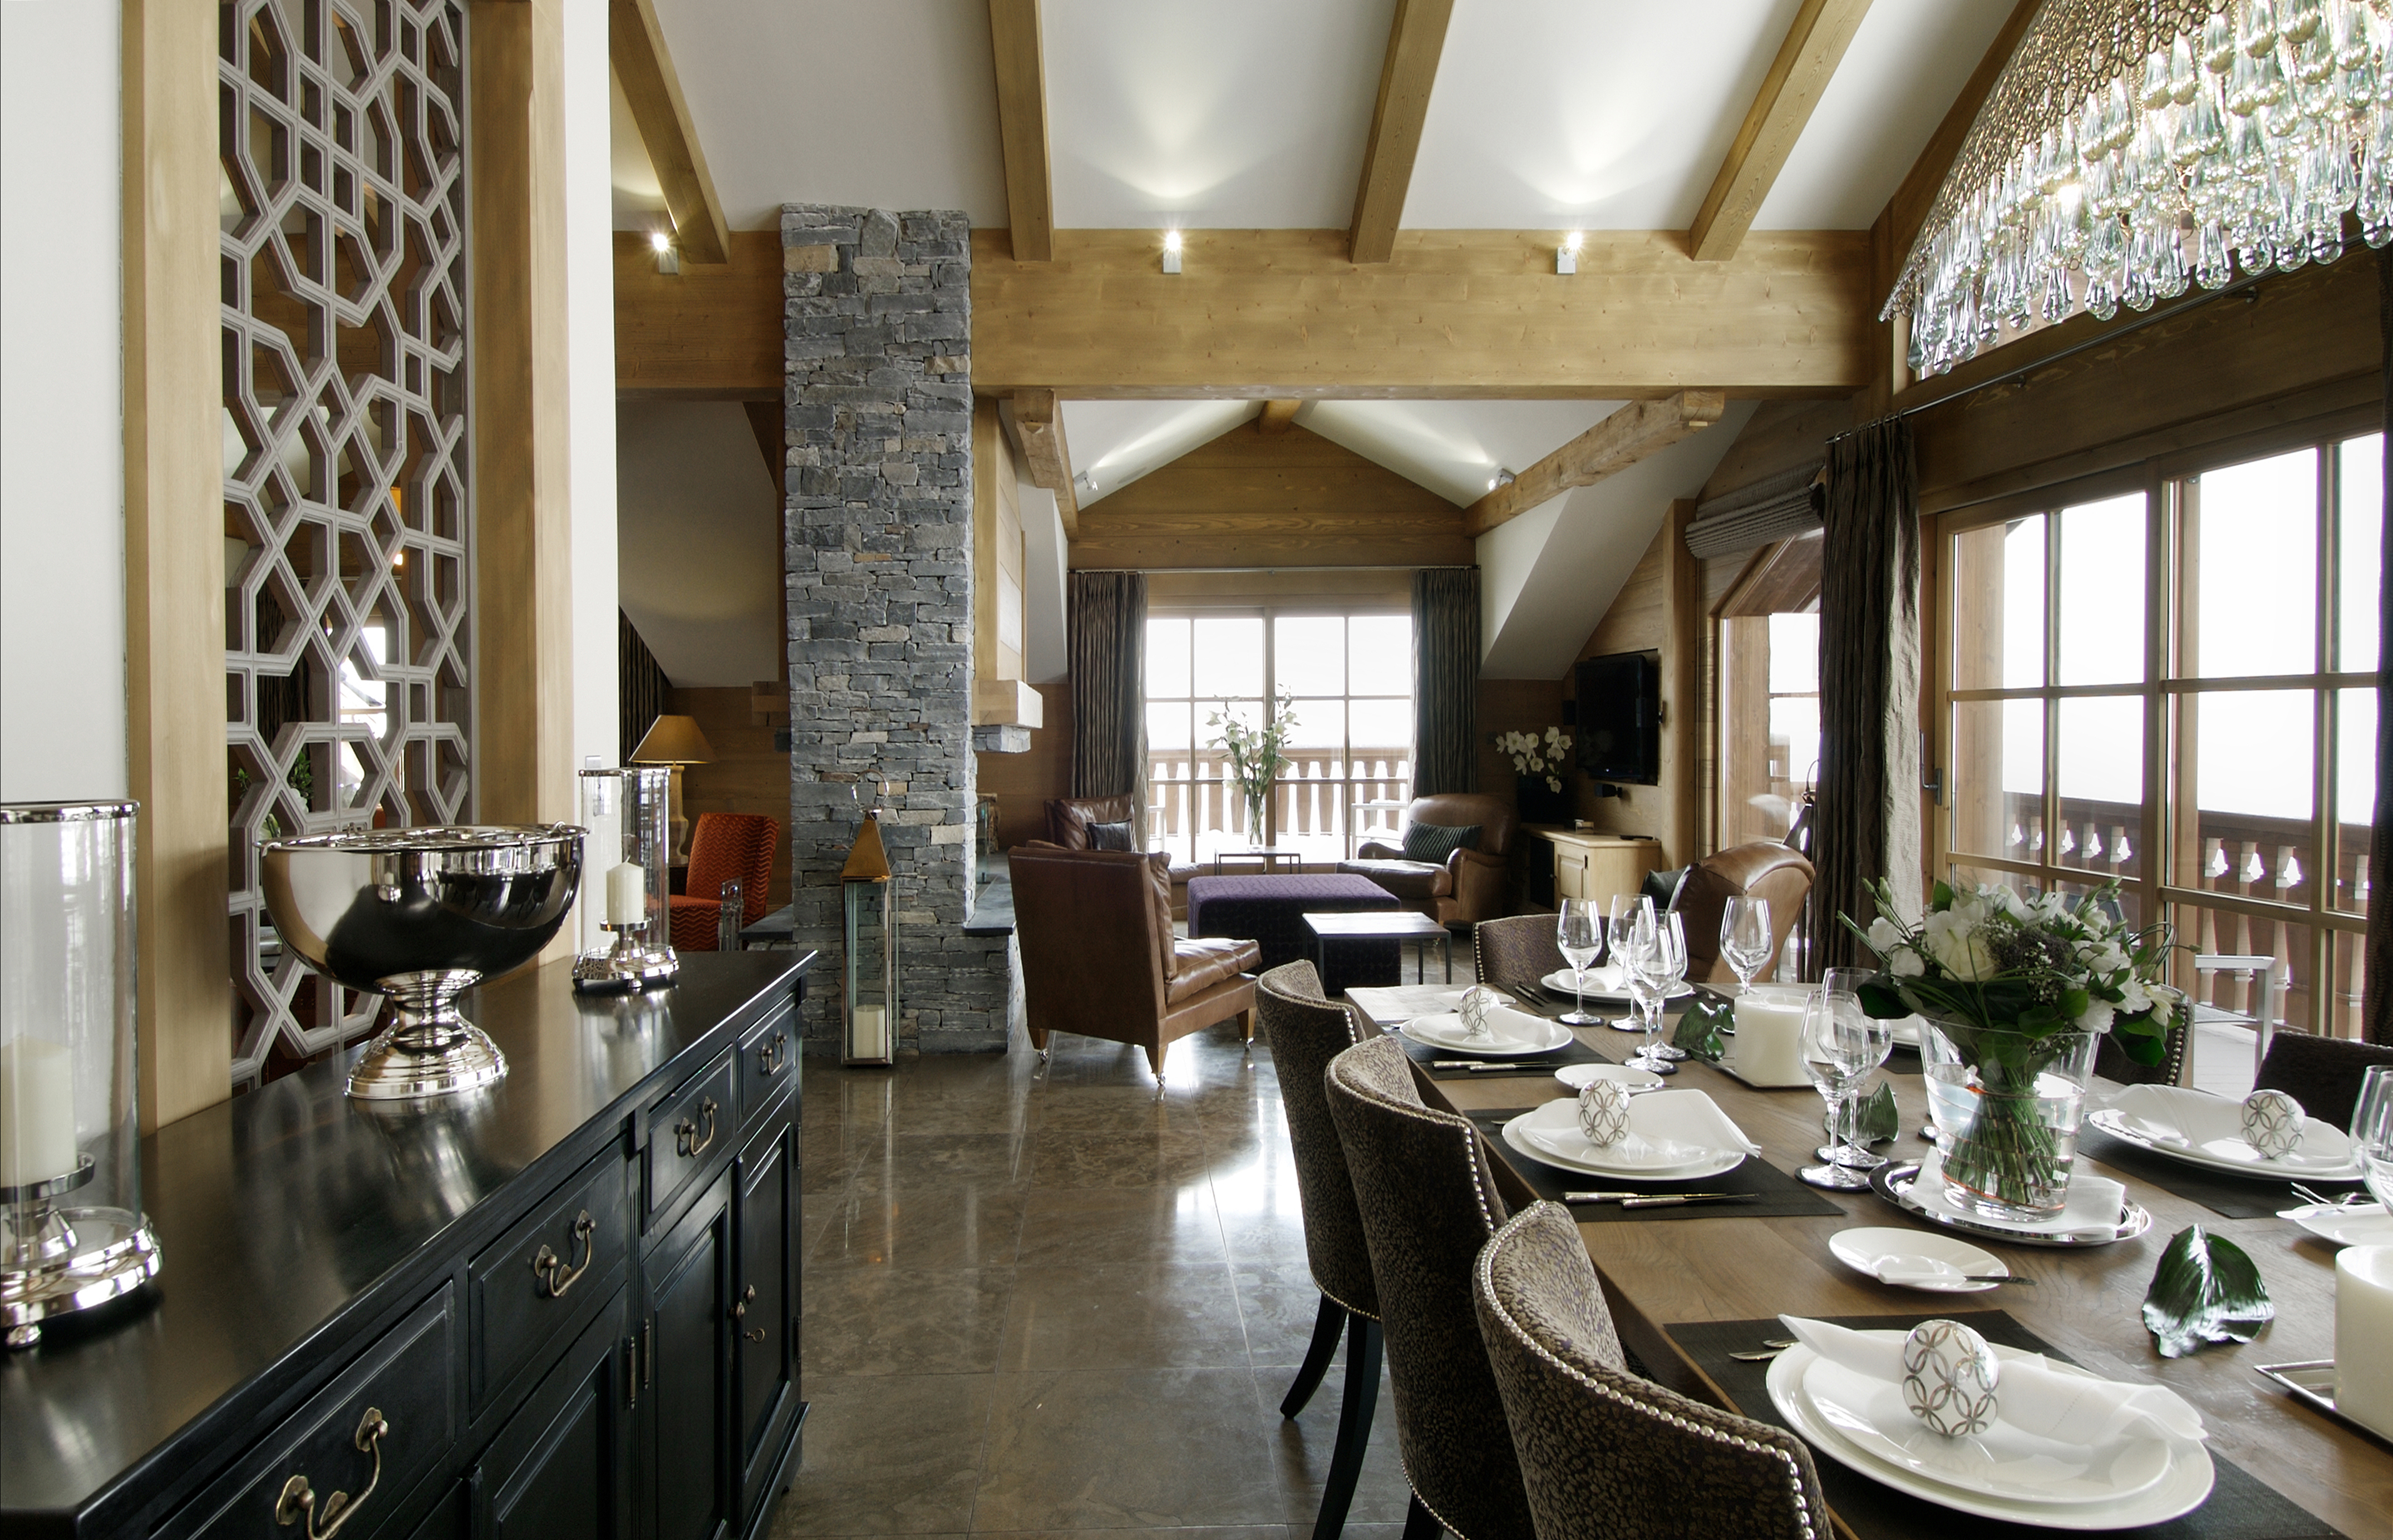 A French Alpine ski chalet, 'Le Blanchot' in Courchevel 1850